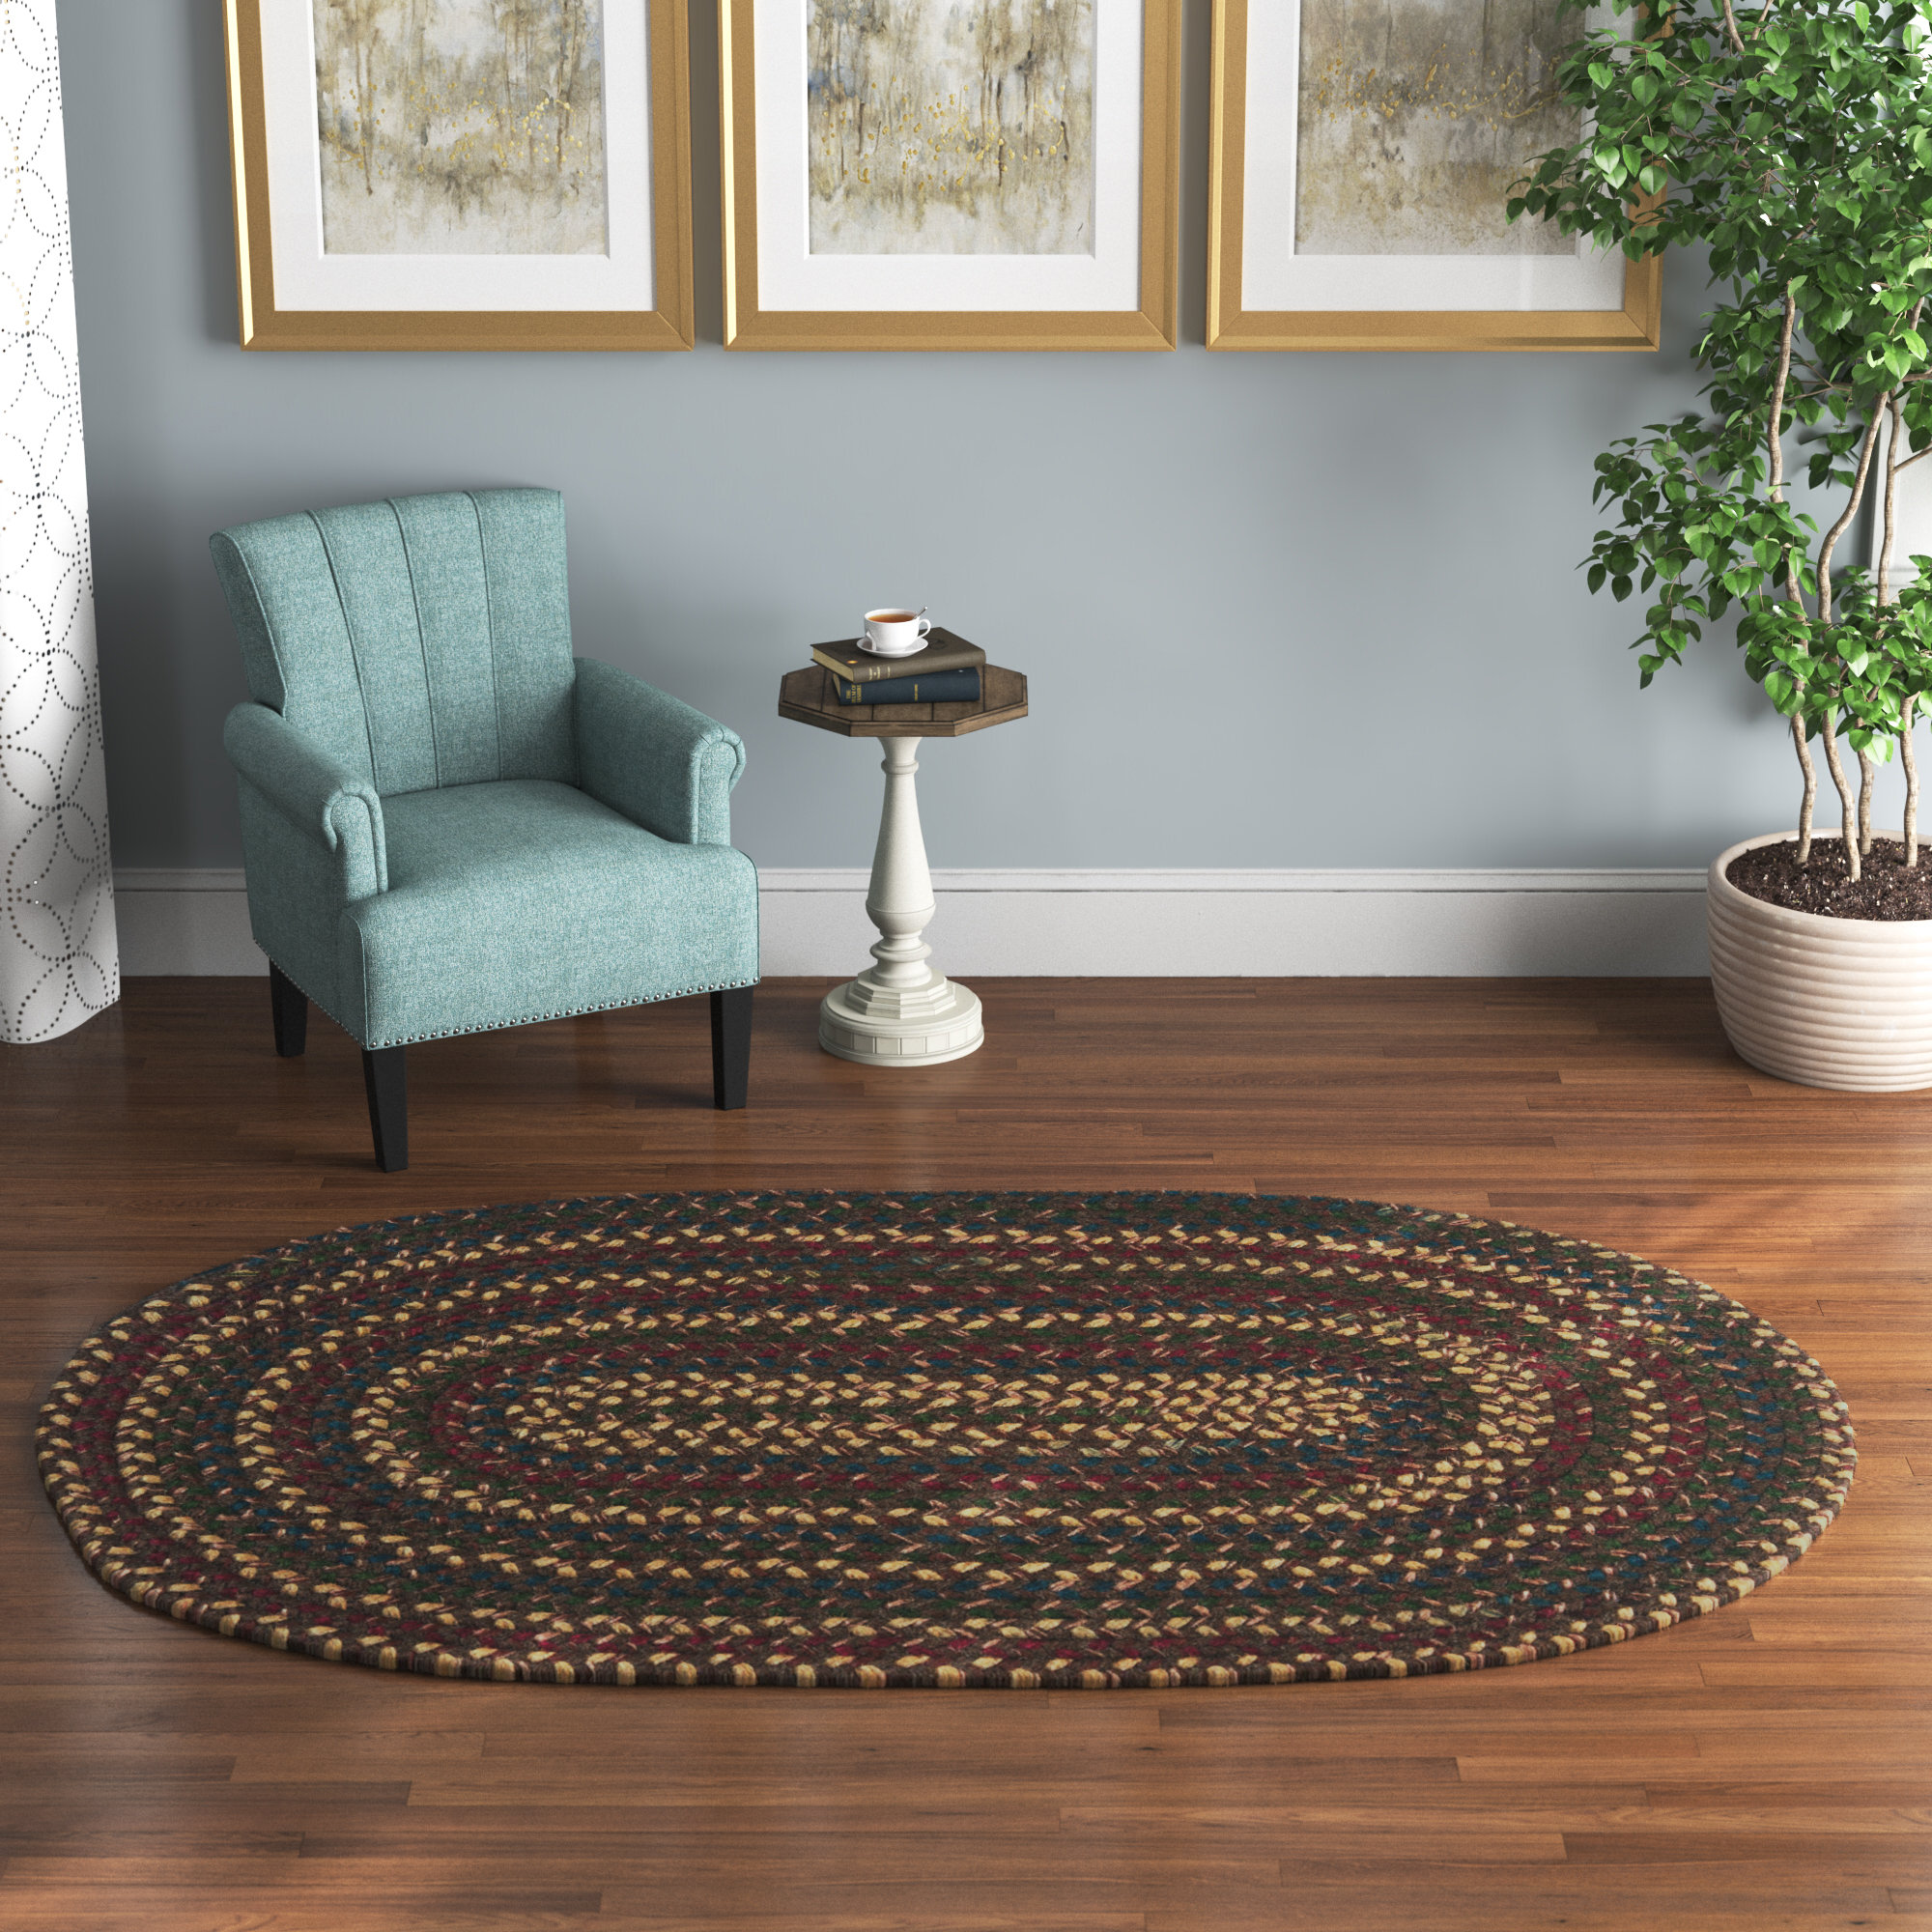 8 X 10 Reversible Oval Area Rug for Living Room, Braided Jute Rugs